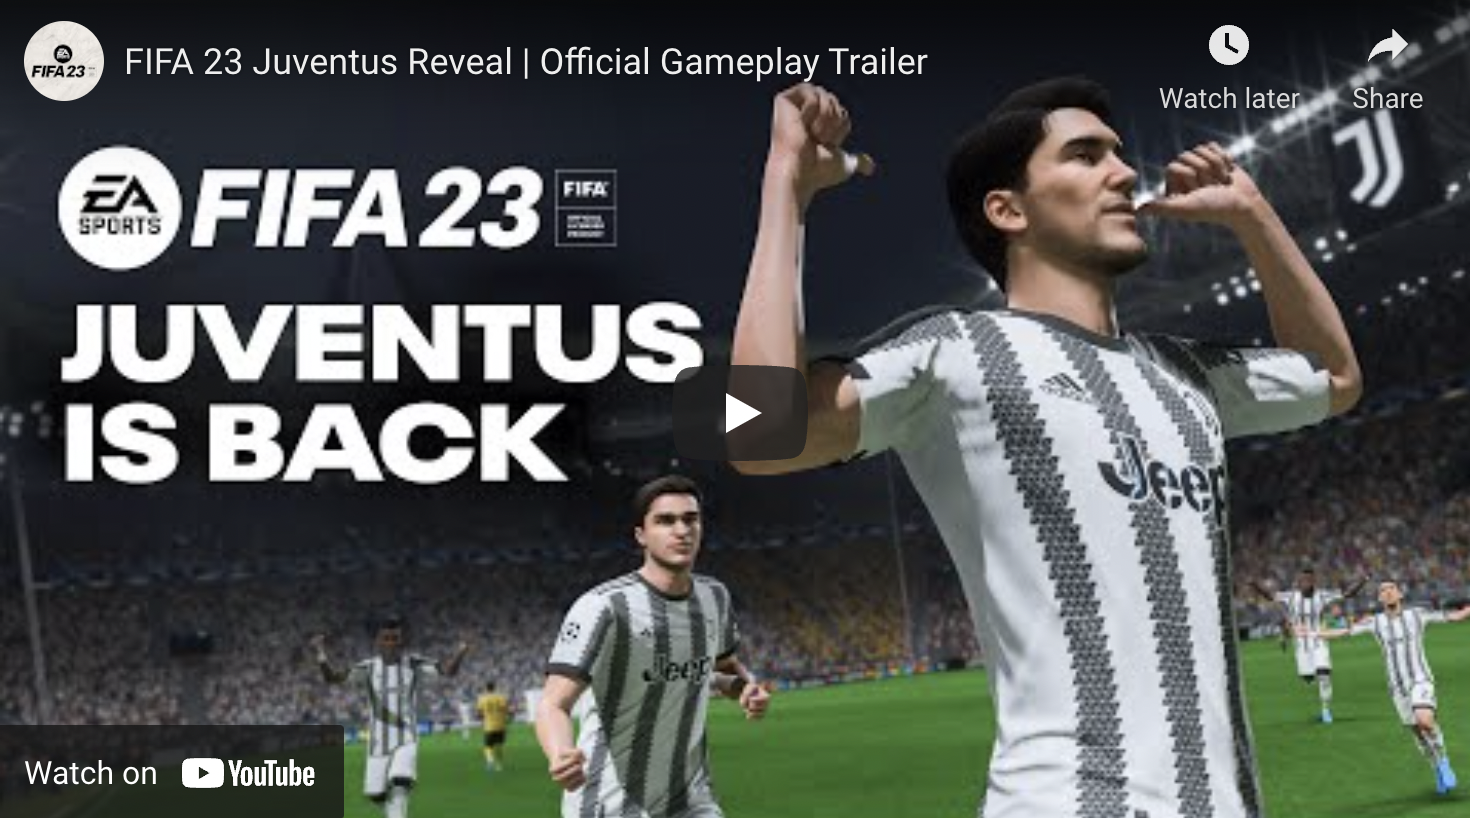 EA Sports signs multi-year deal with Juventus as FIFA franchise draws to a close